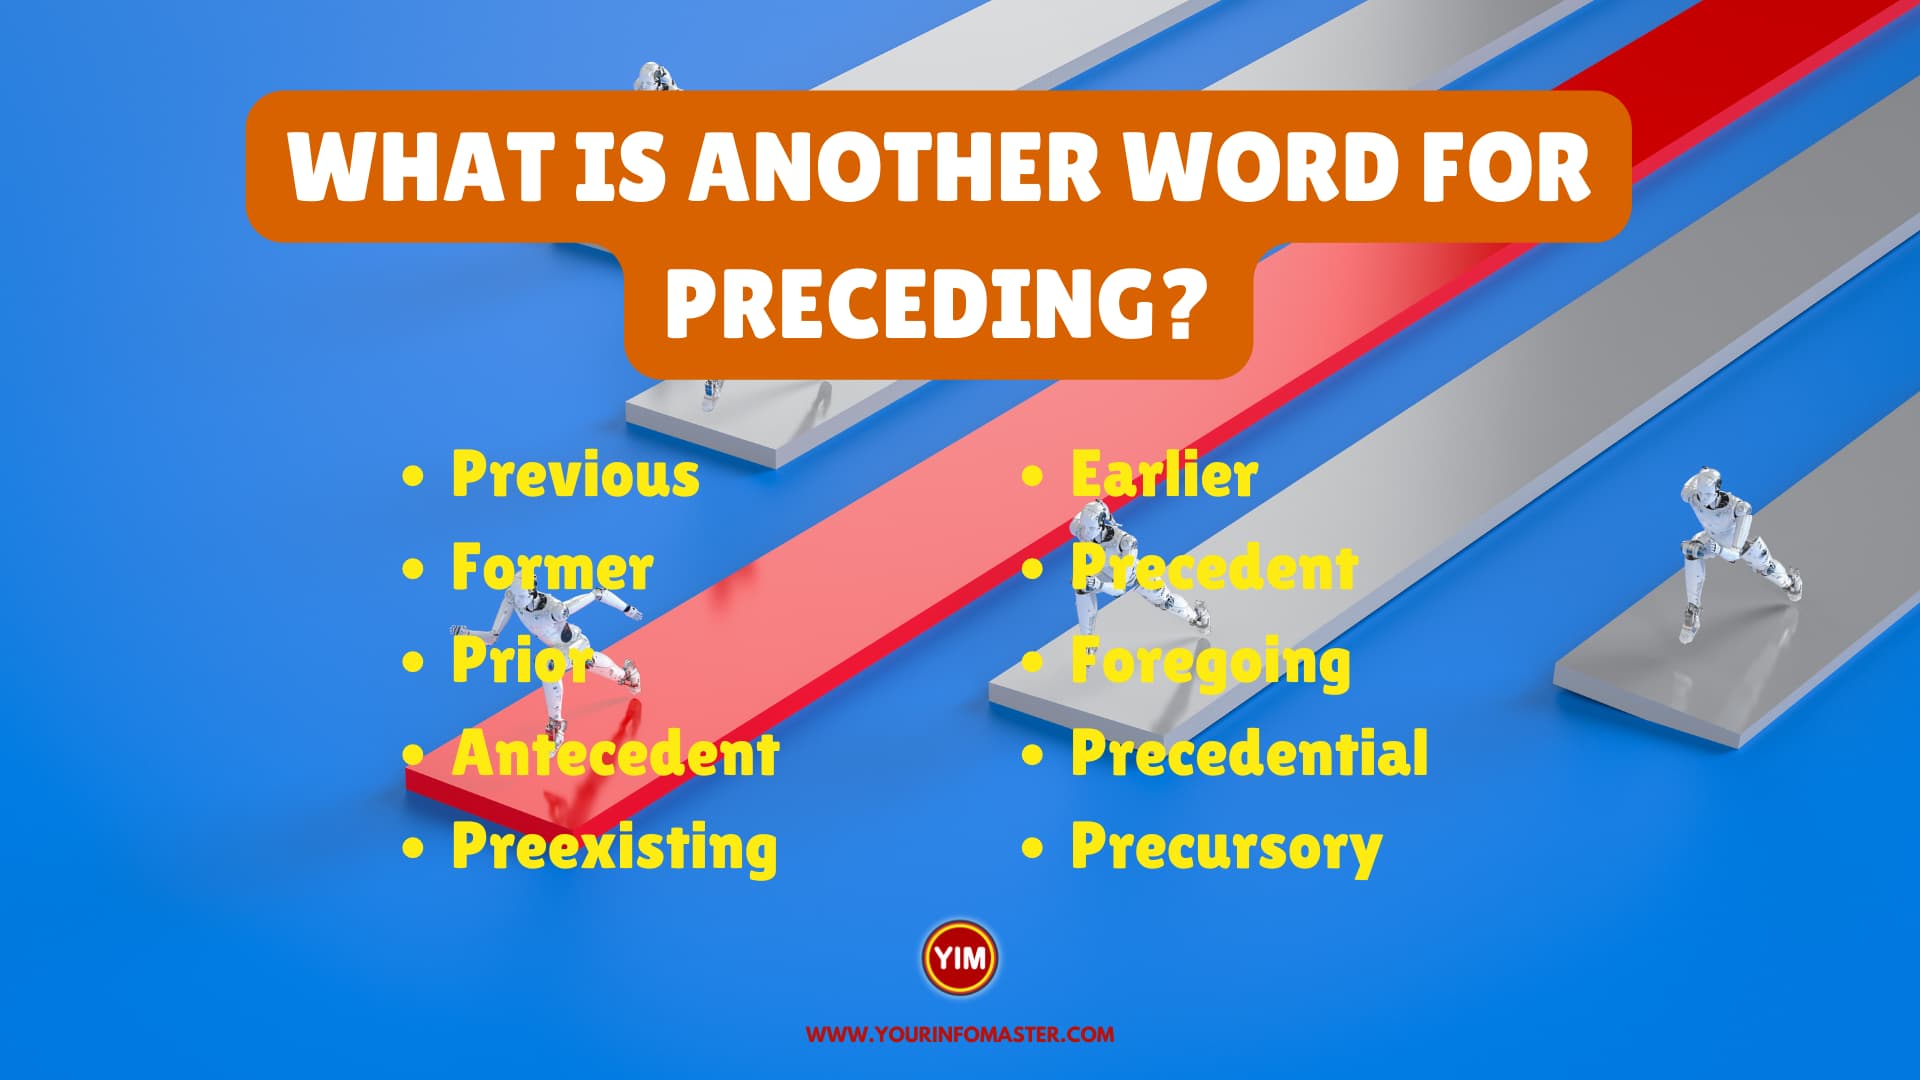 What is another word for Preceding